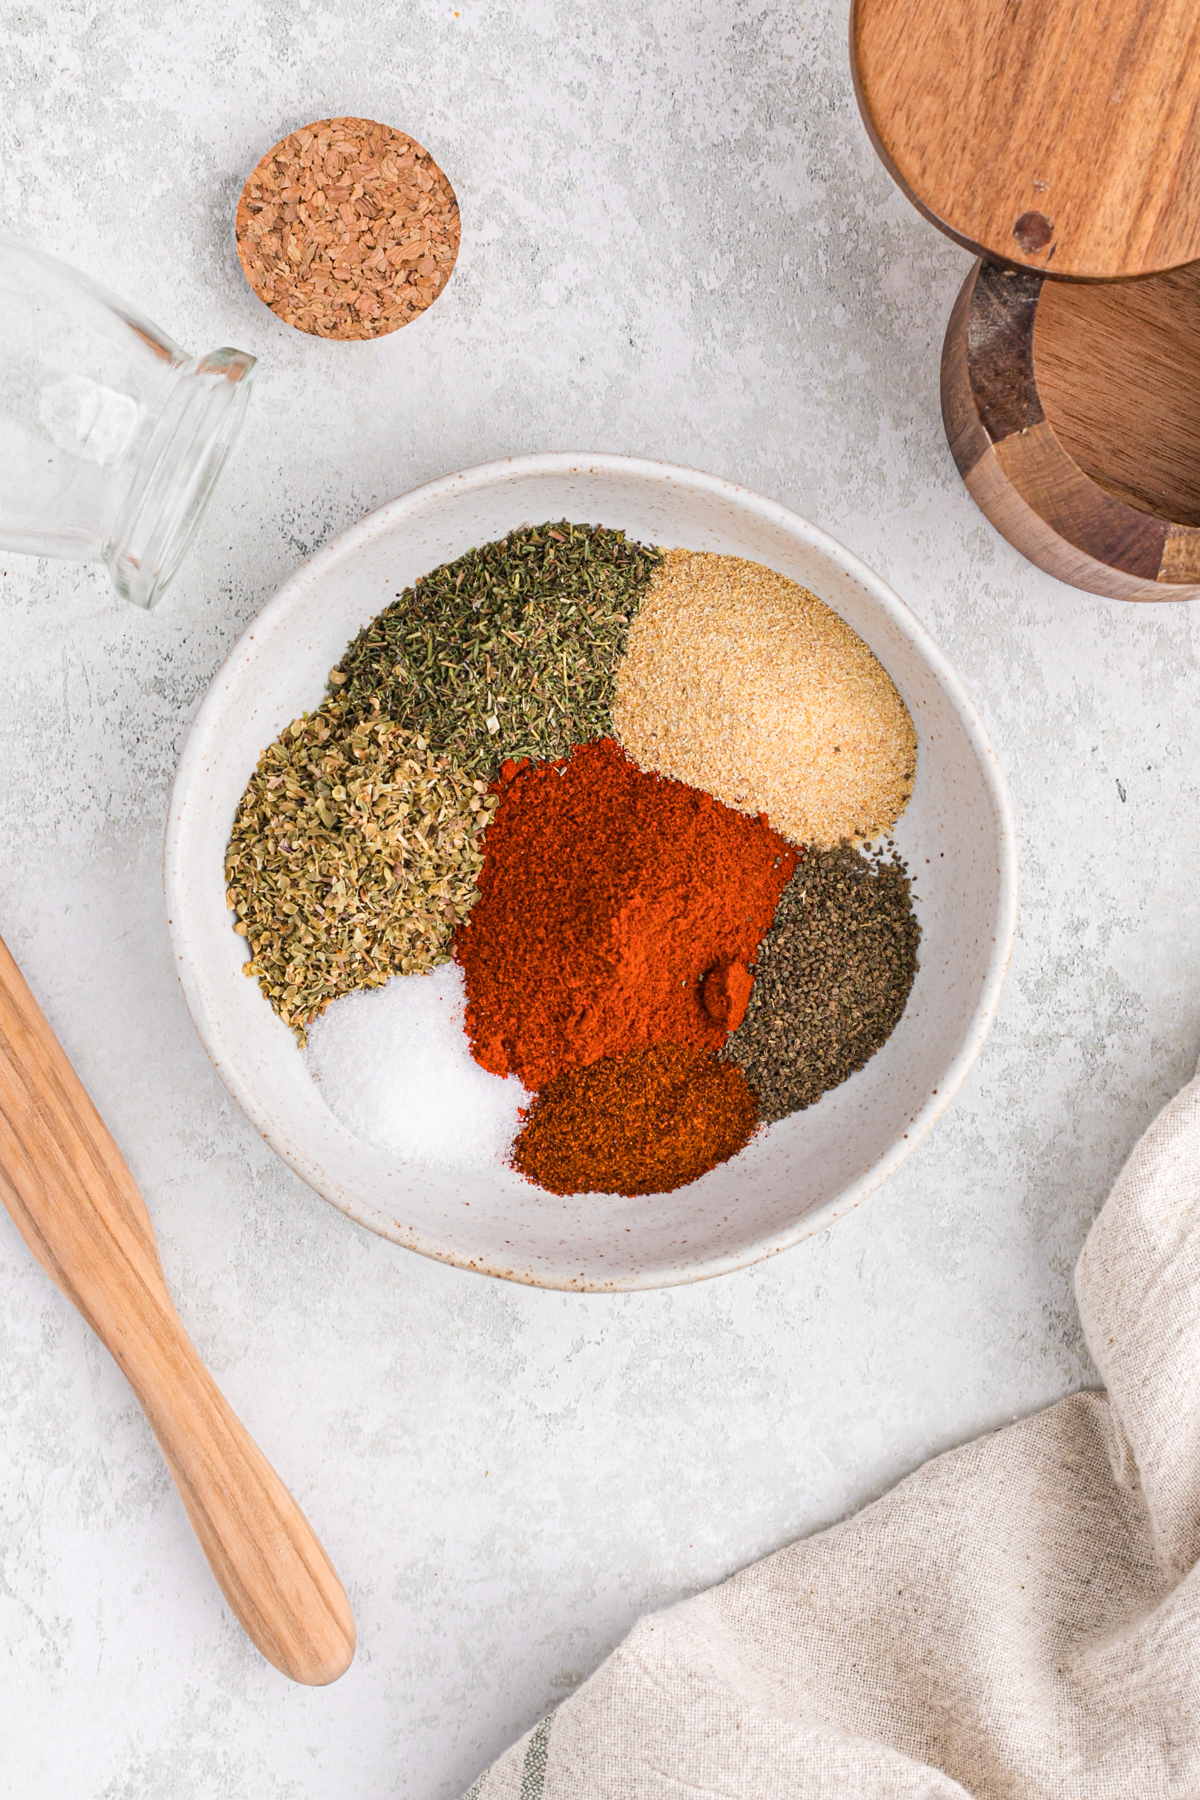 Several spices and dried herbs in a bowl before combining